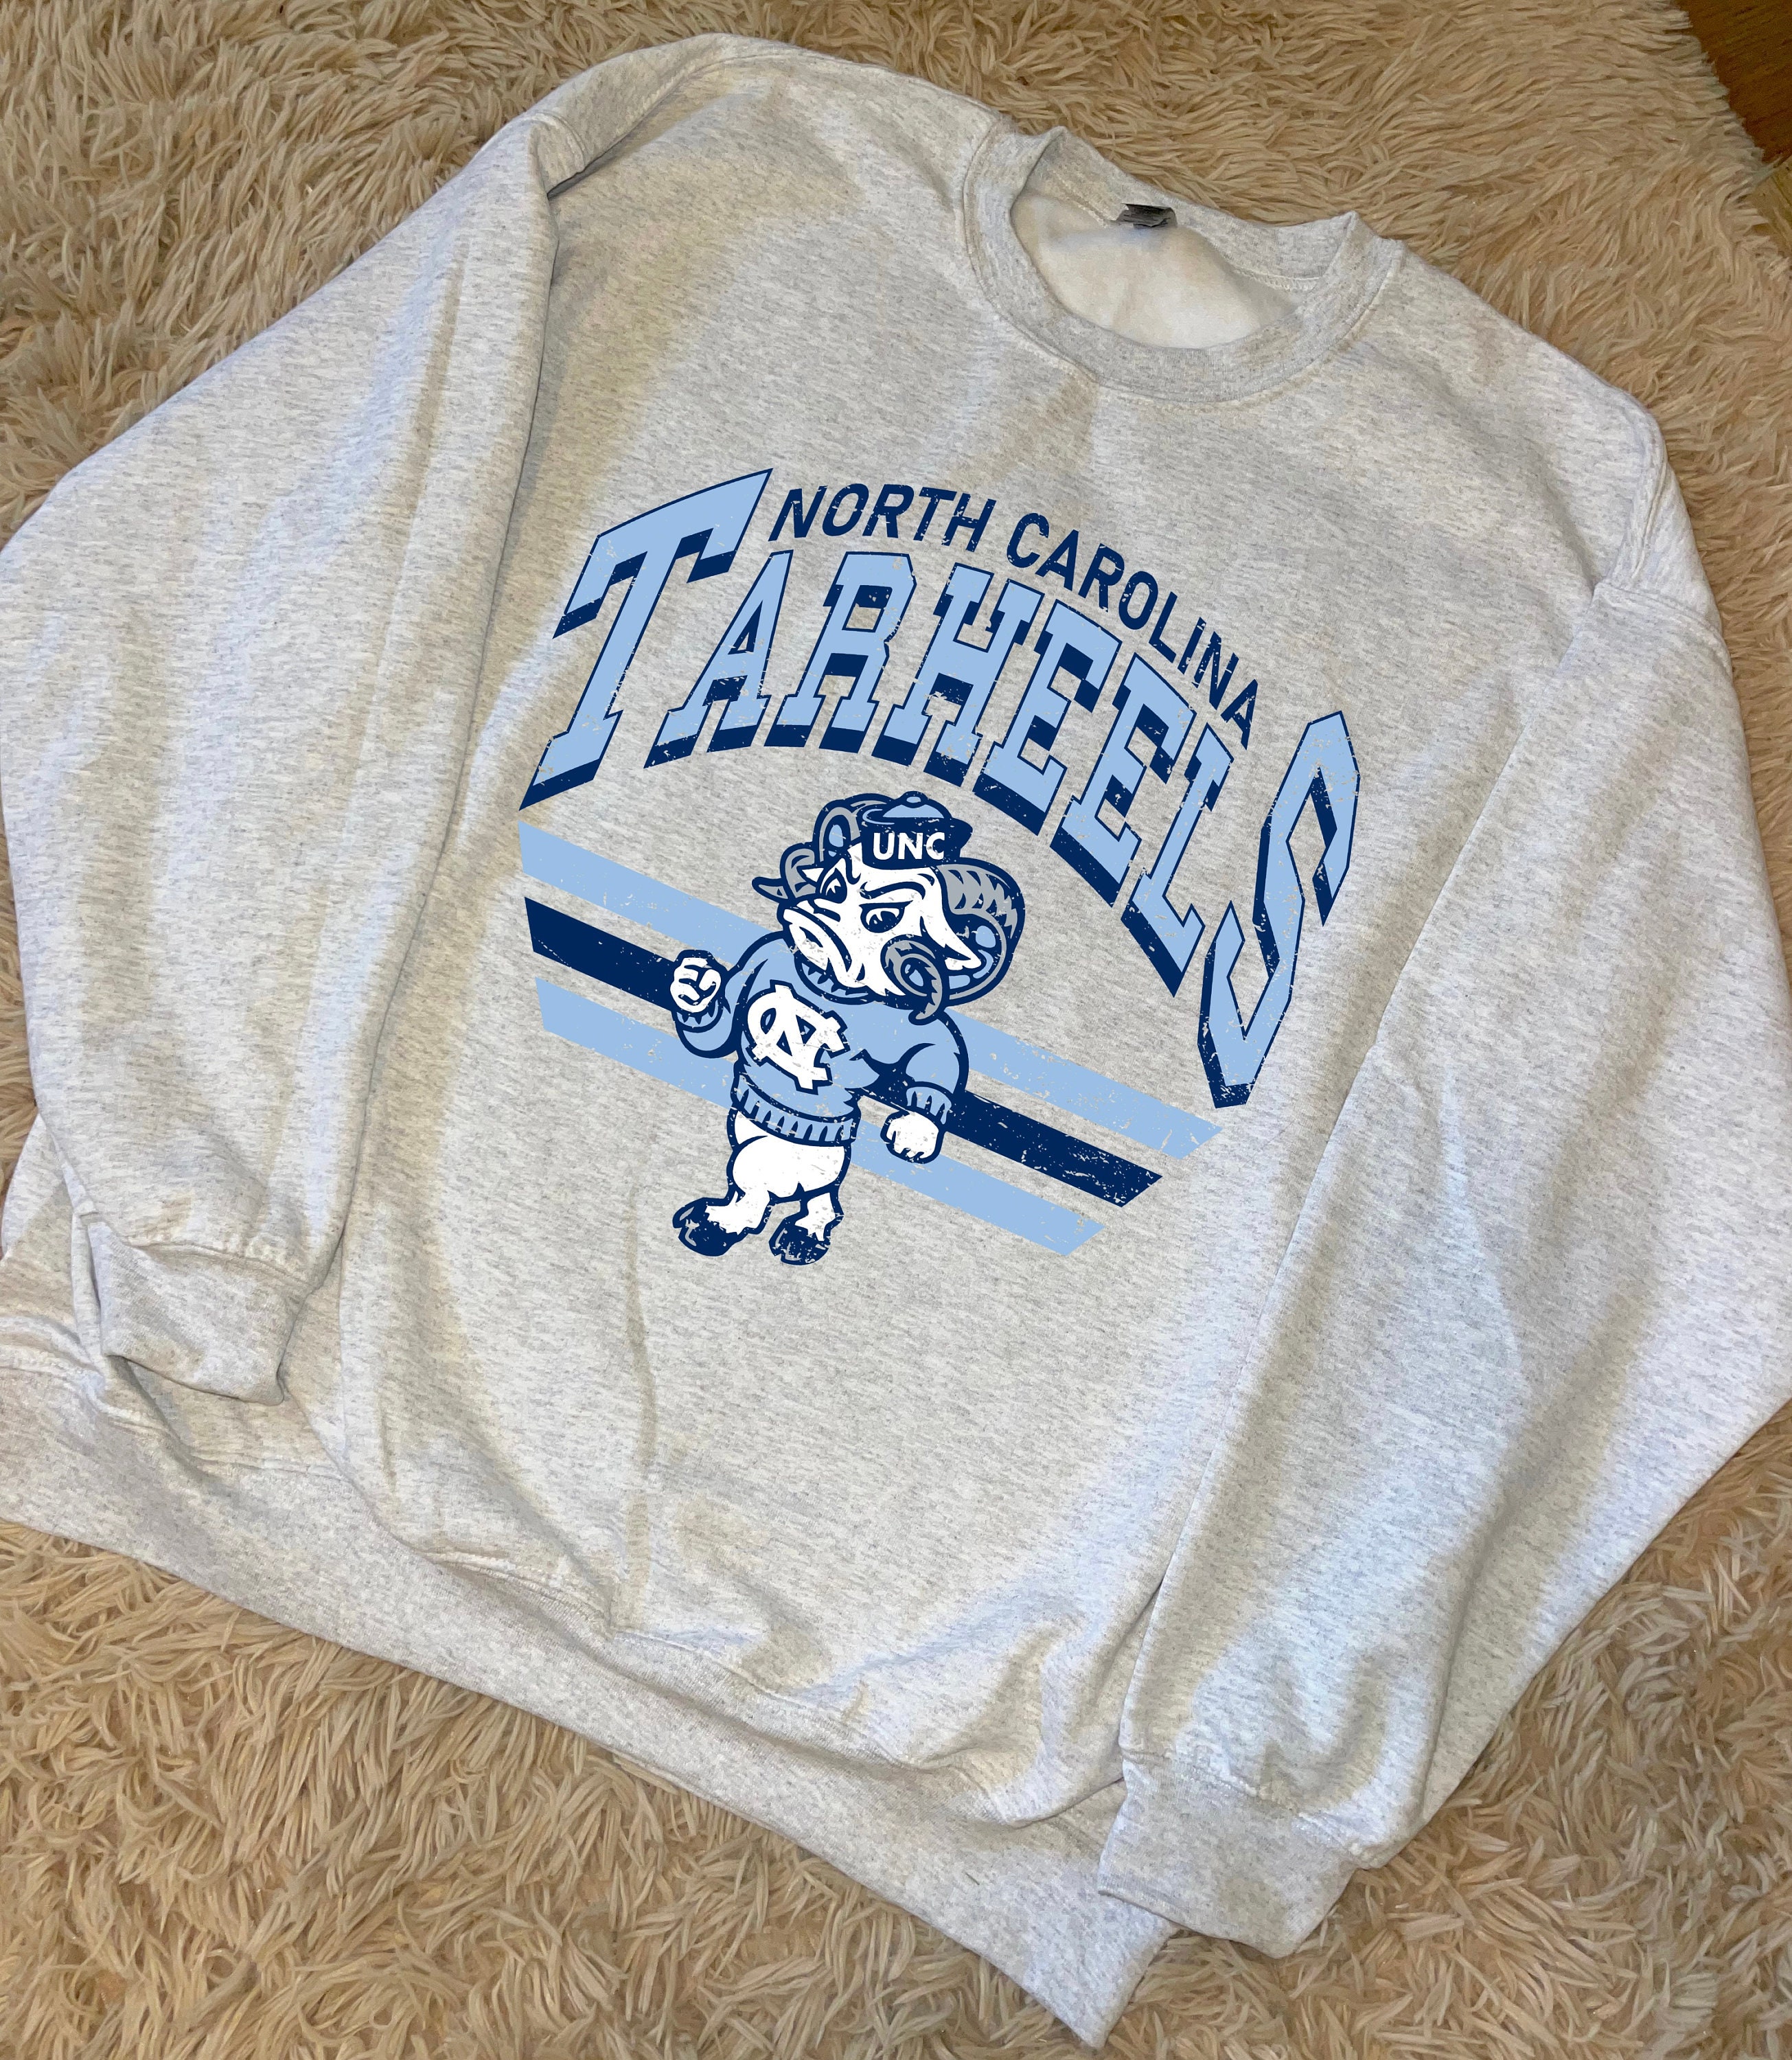 Unc Shooting Shirt, Unc School Of Law Hoodie Football Gift For Men Women -  Family Gift Ideas That Everyone Will Enjoy